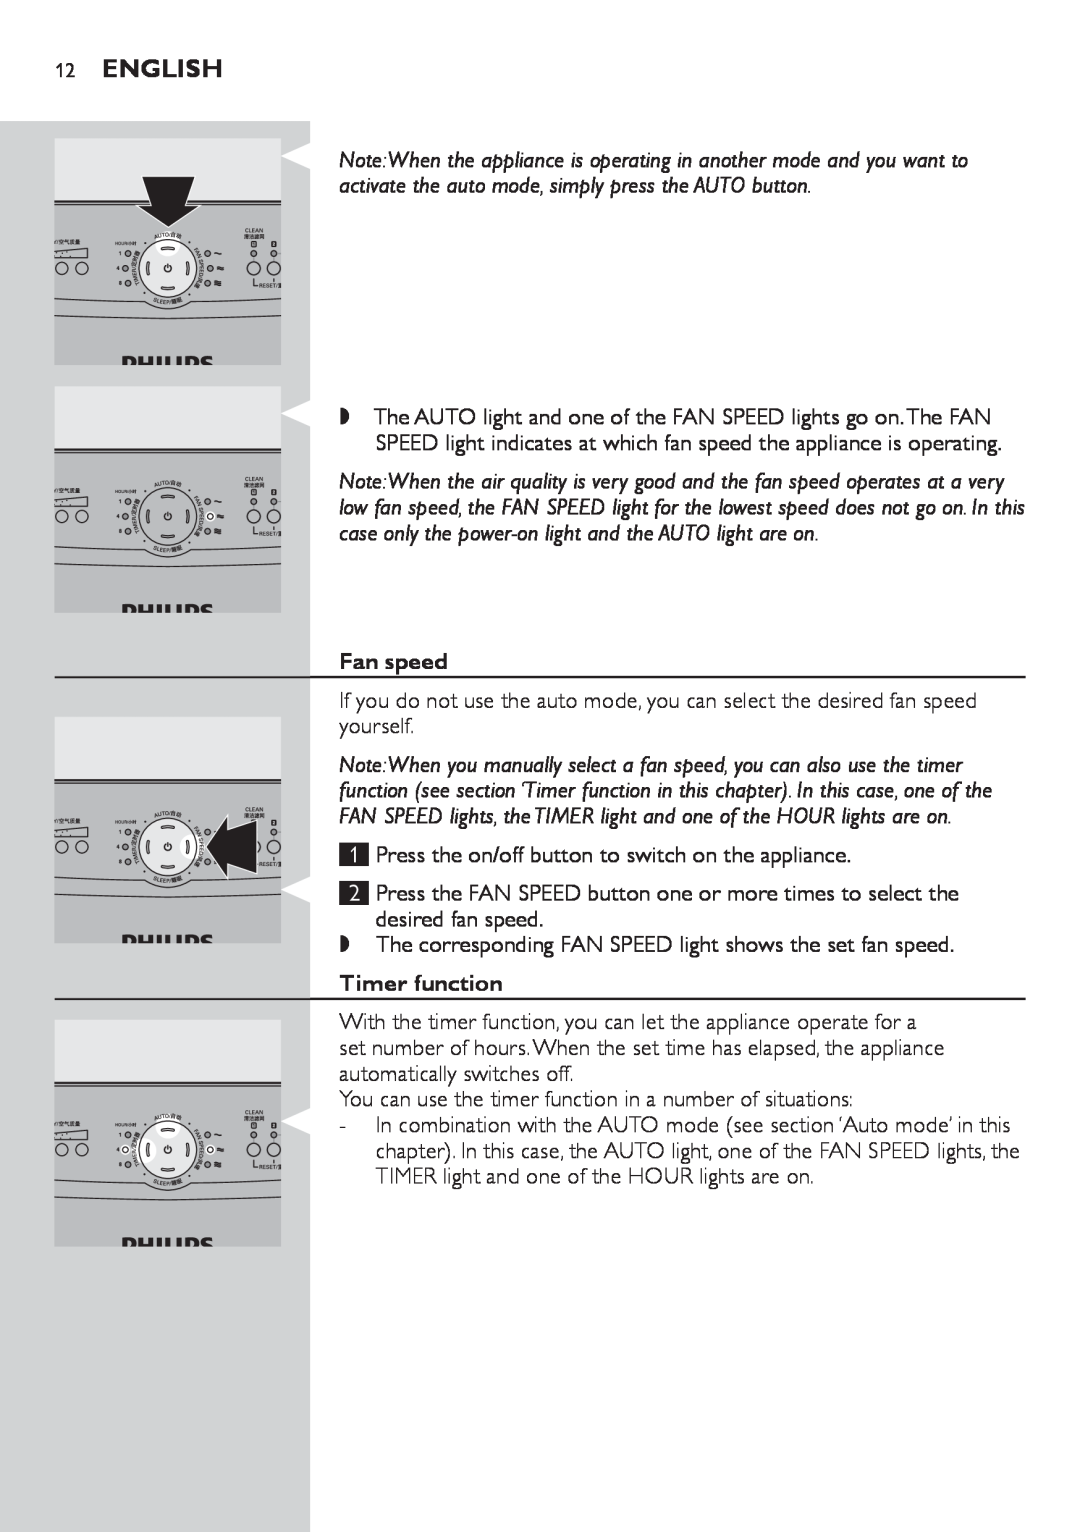 Philips AC4002 manual English, Fan speed, Timer function 